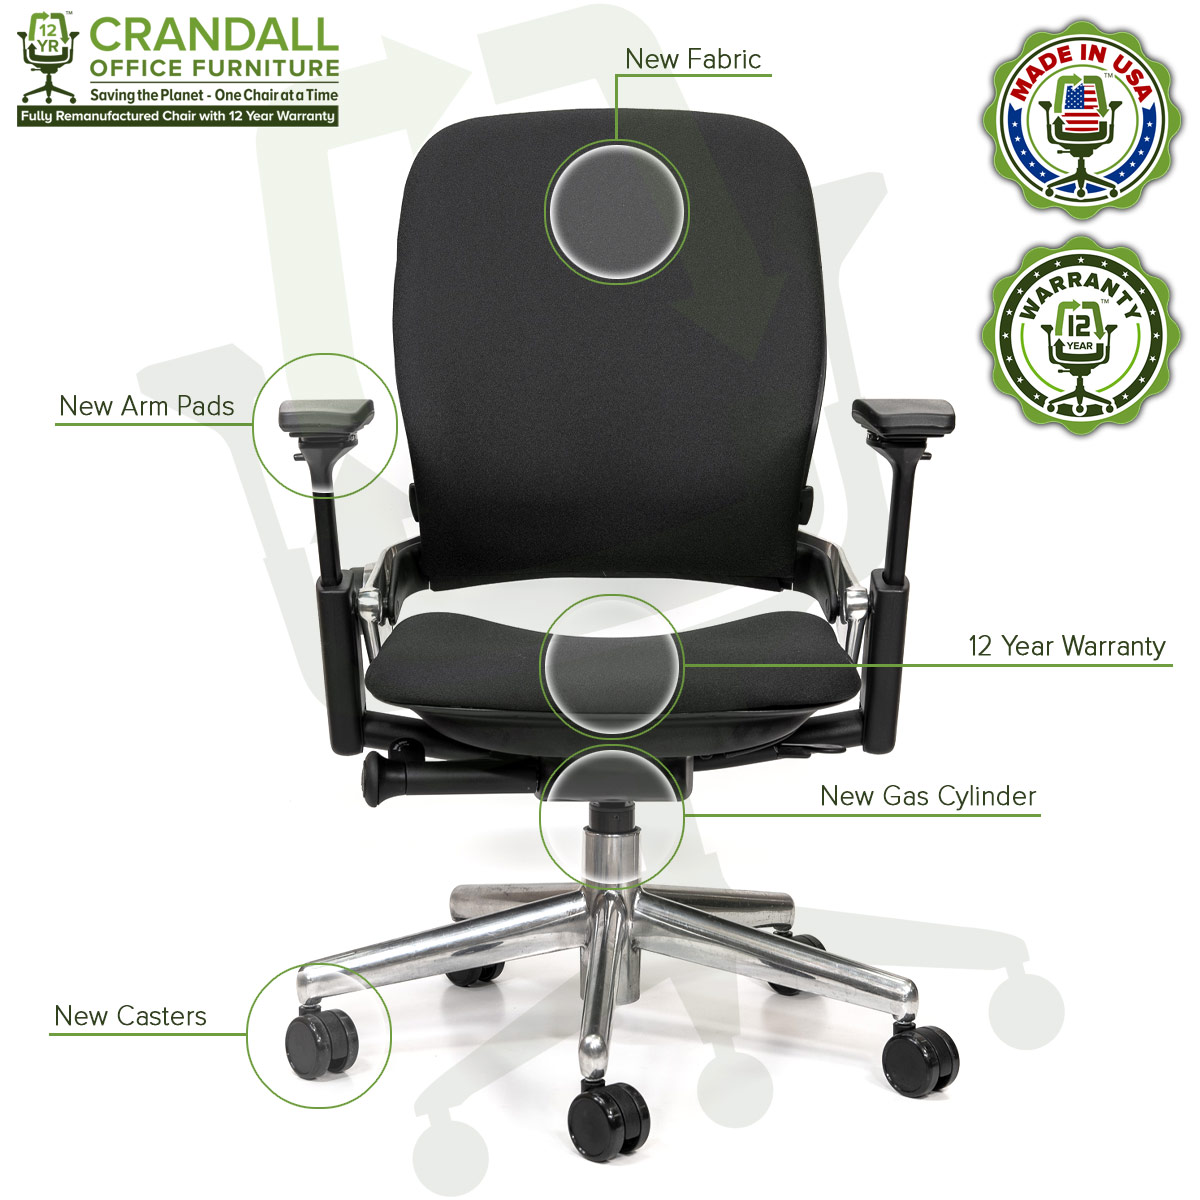 Crandall Office Furniture Remanufactured Steelcase V2 Leap Chair - Polished Aluminum Frame 06